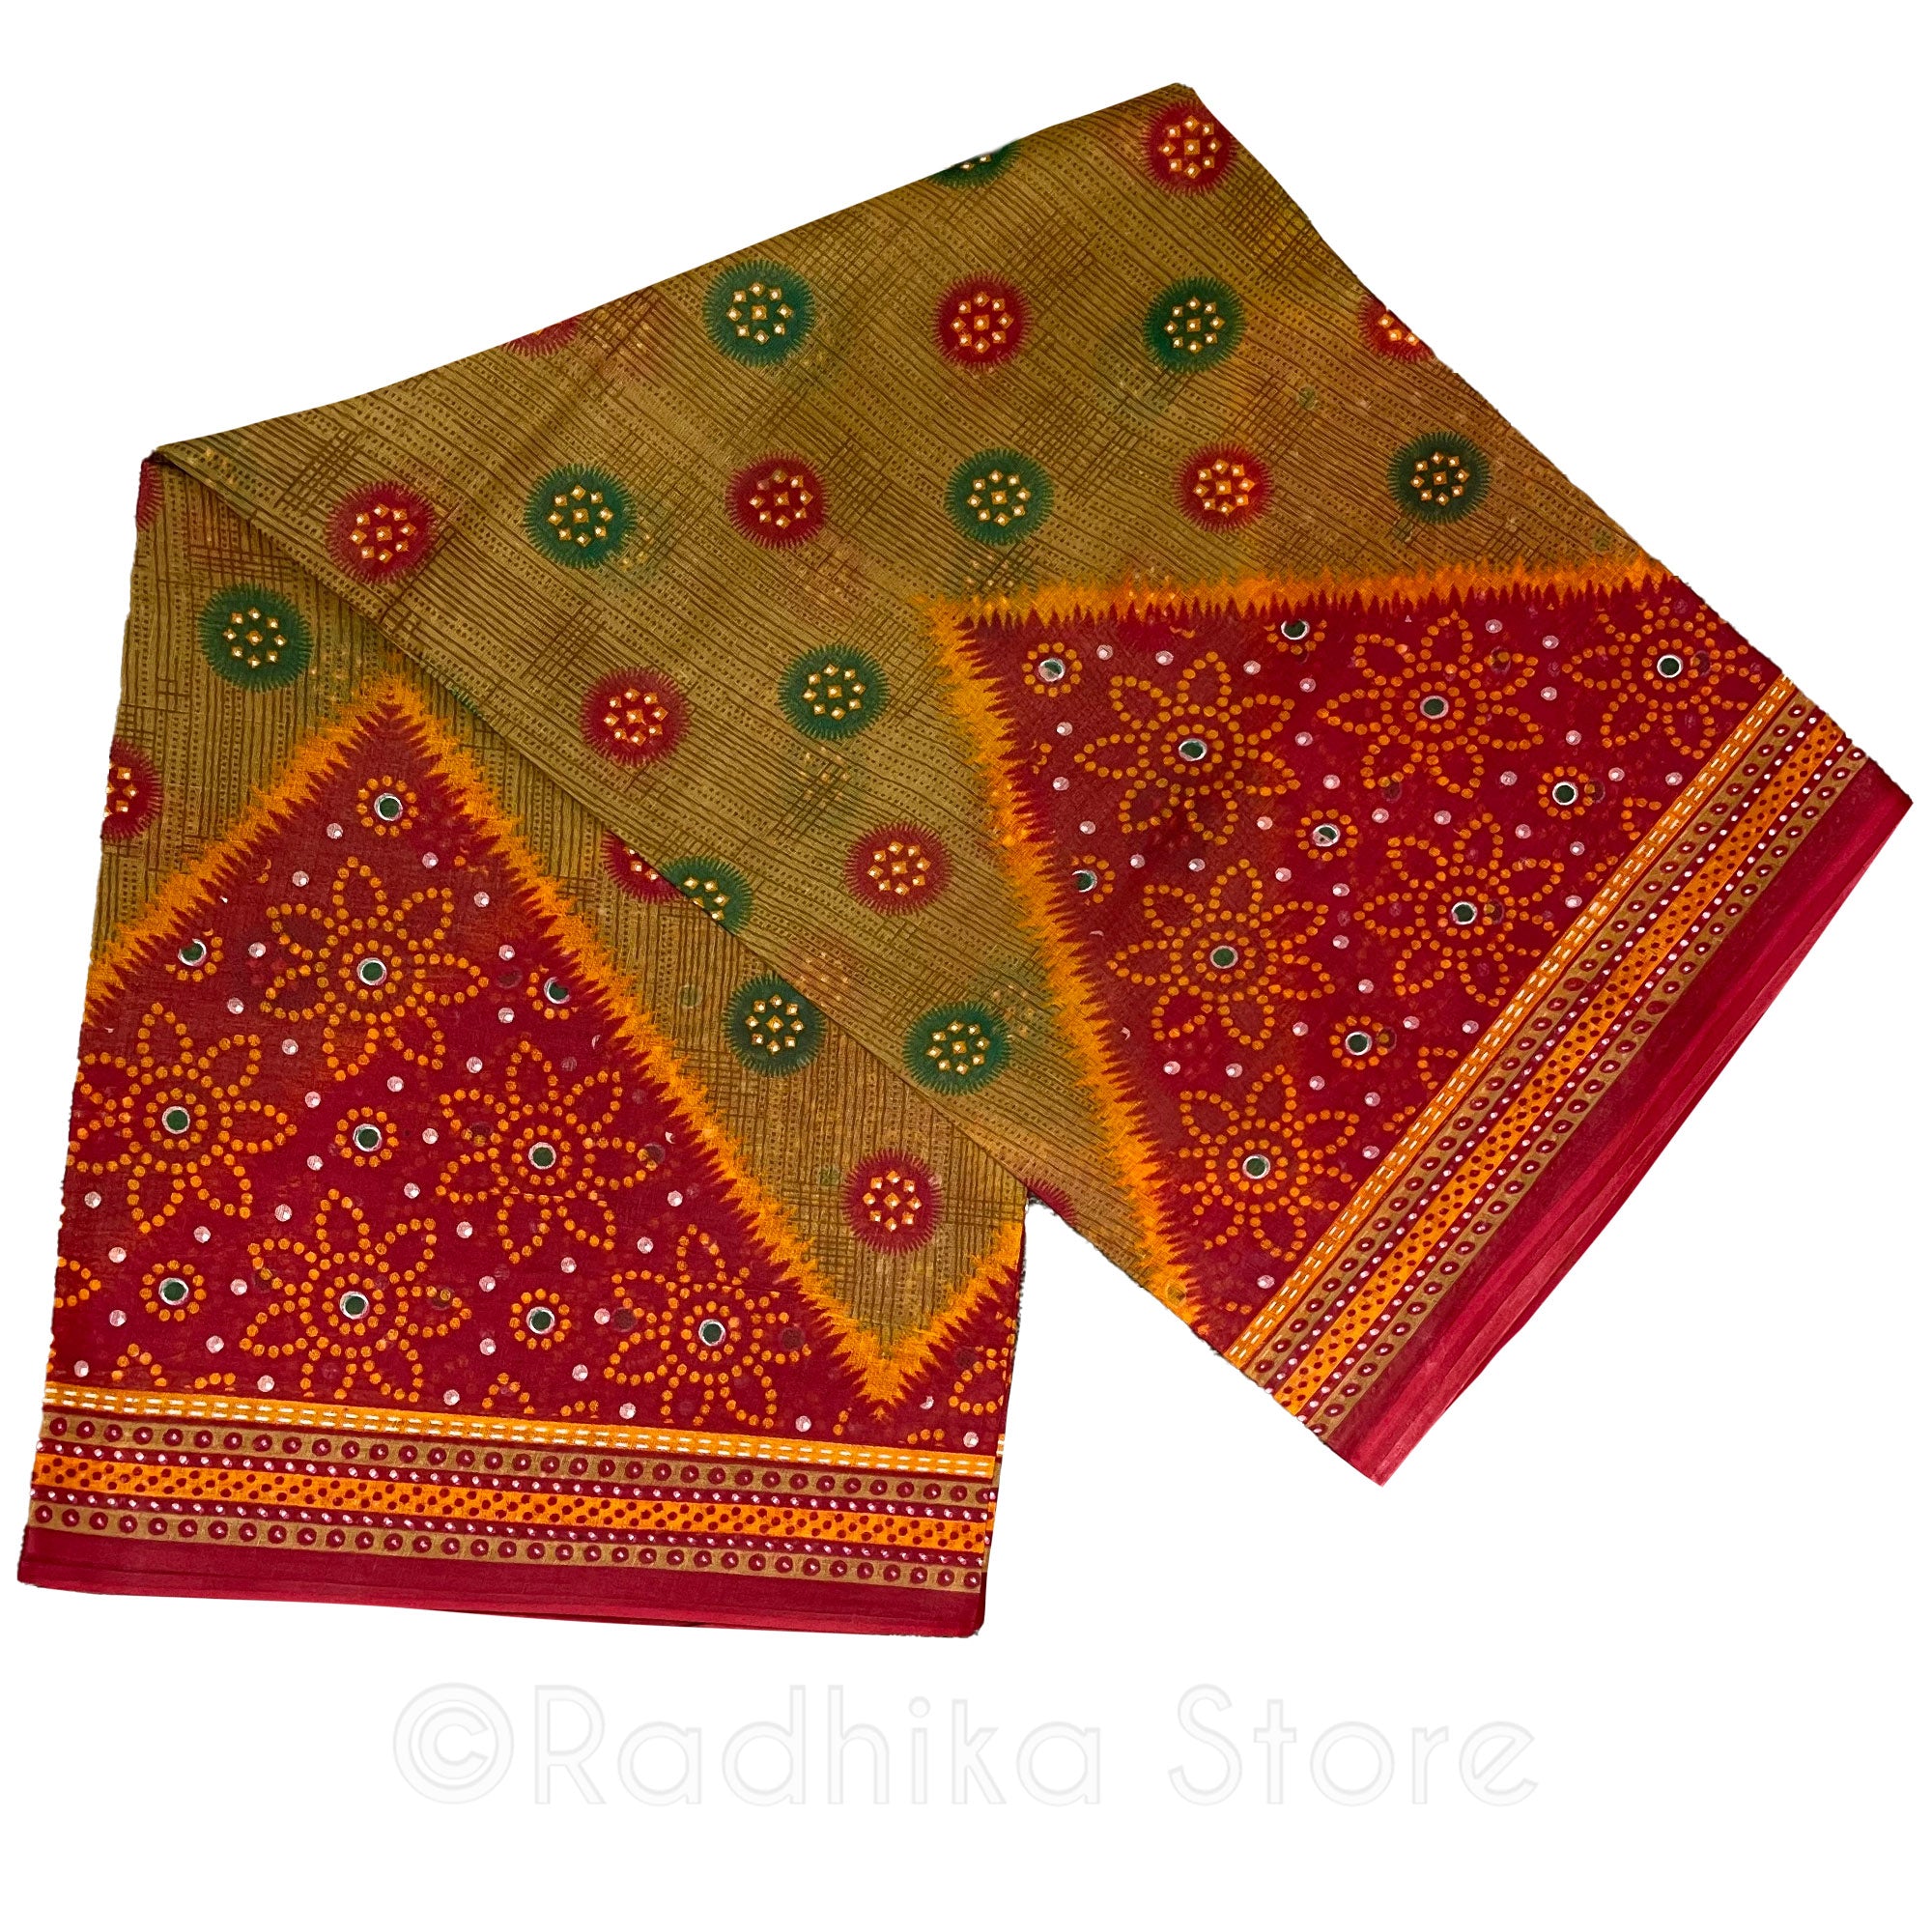 Flower Dots - Printed Cotton Saree - Oranges-Golden Tan and Green